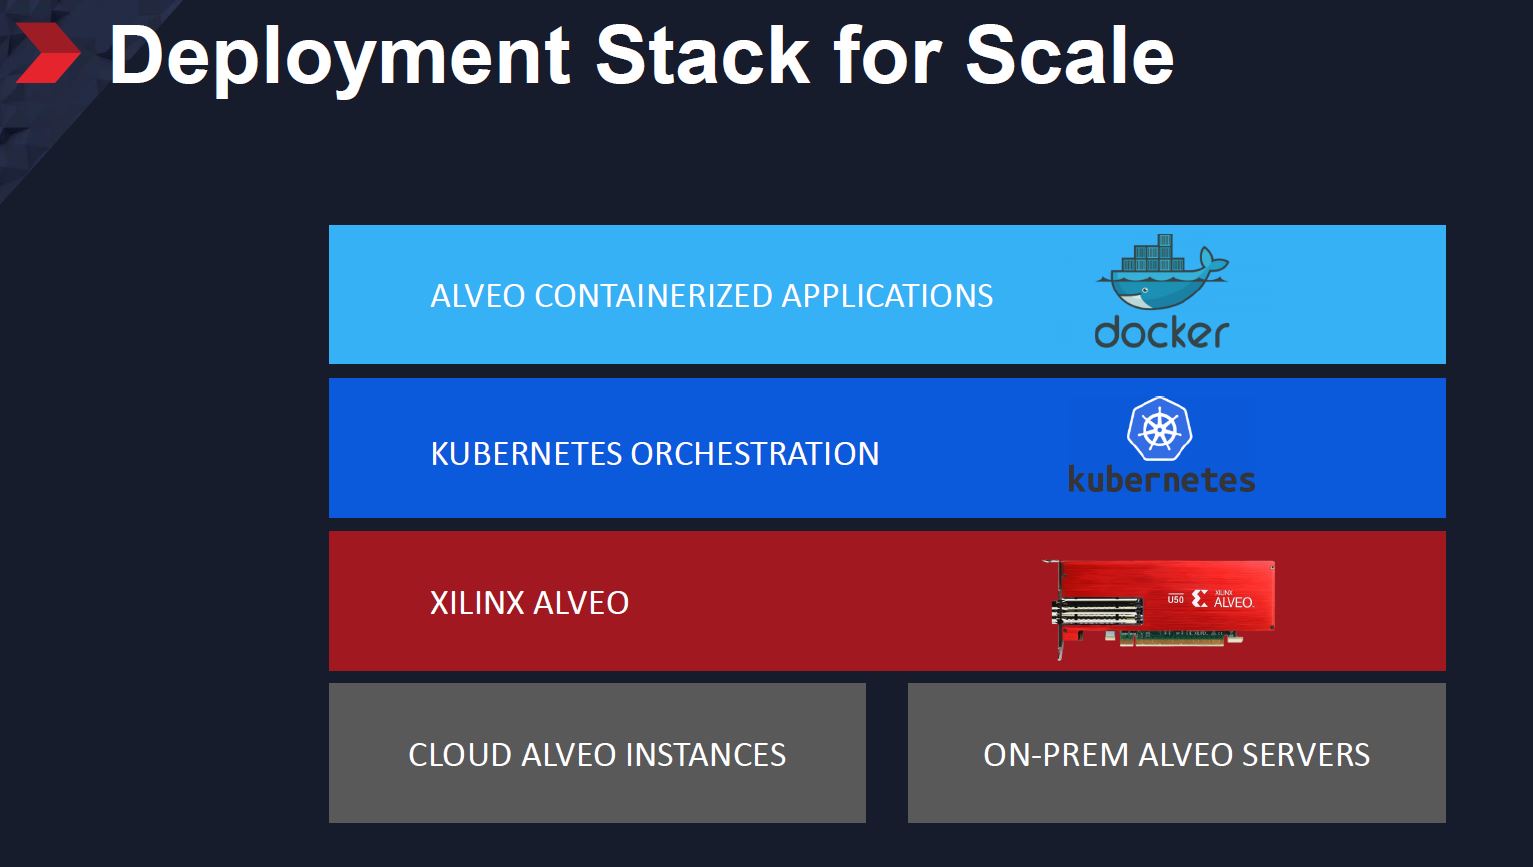 Xilinx Alveo Container Solution Stack For Scale